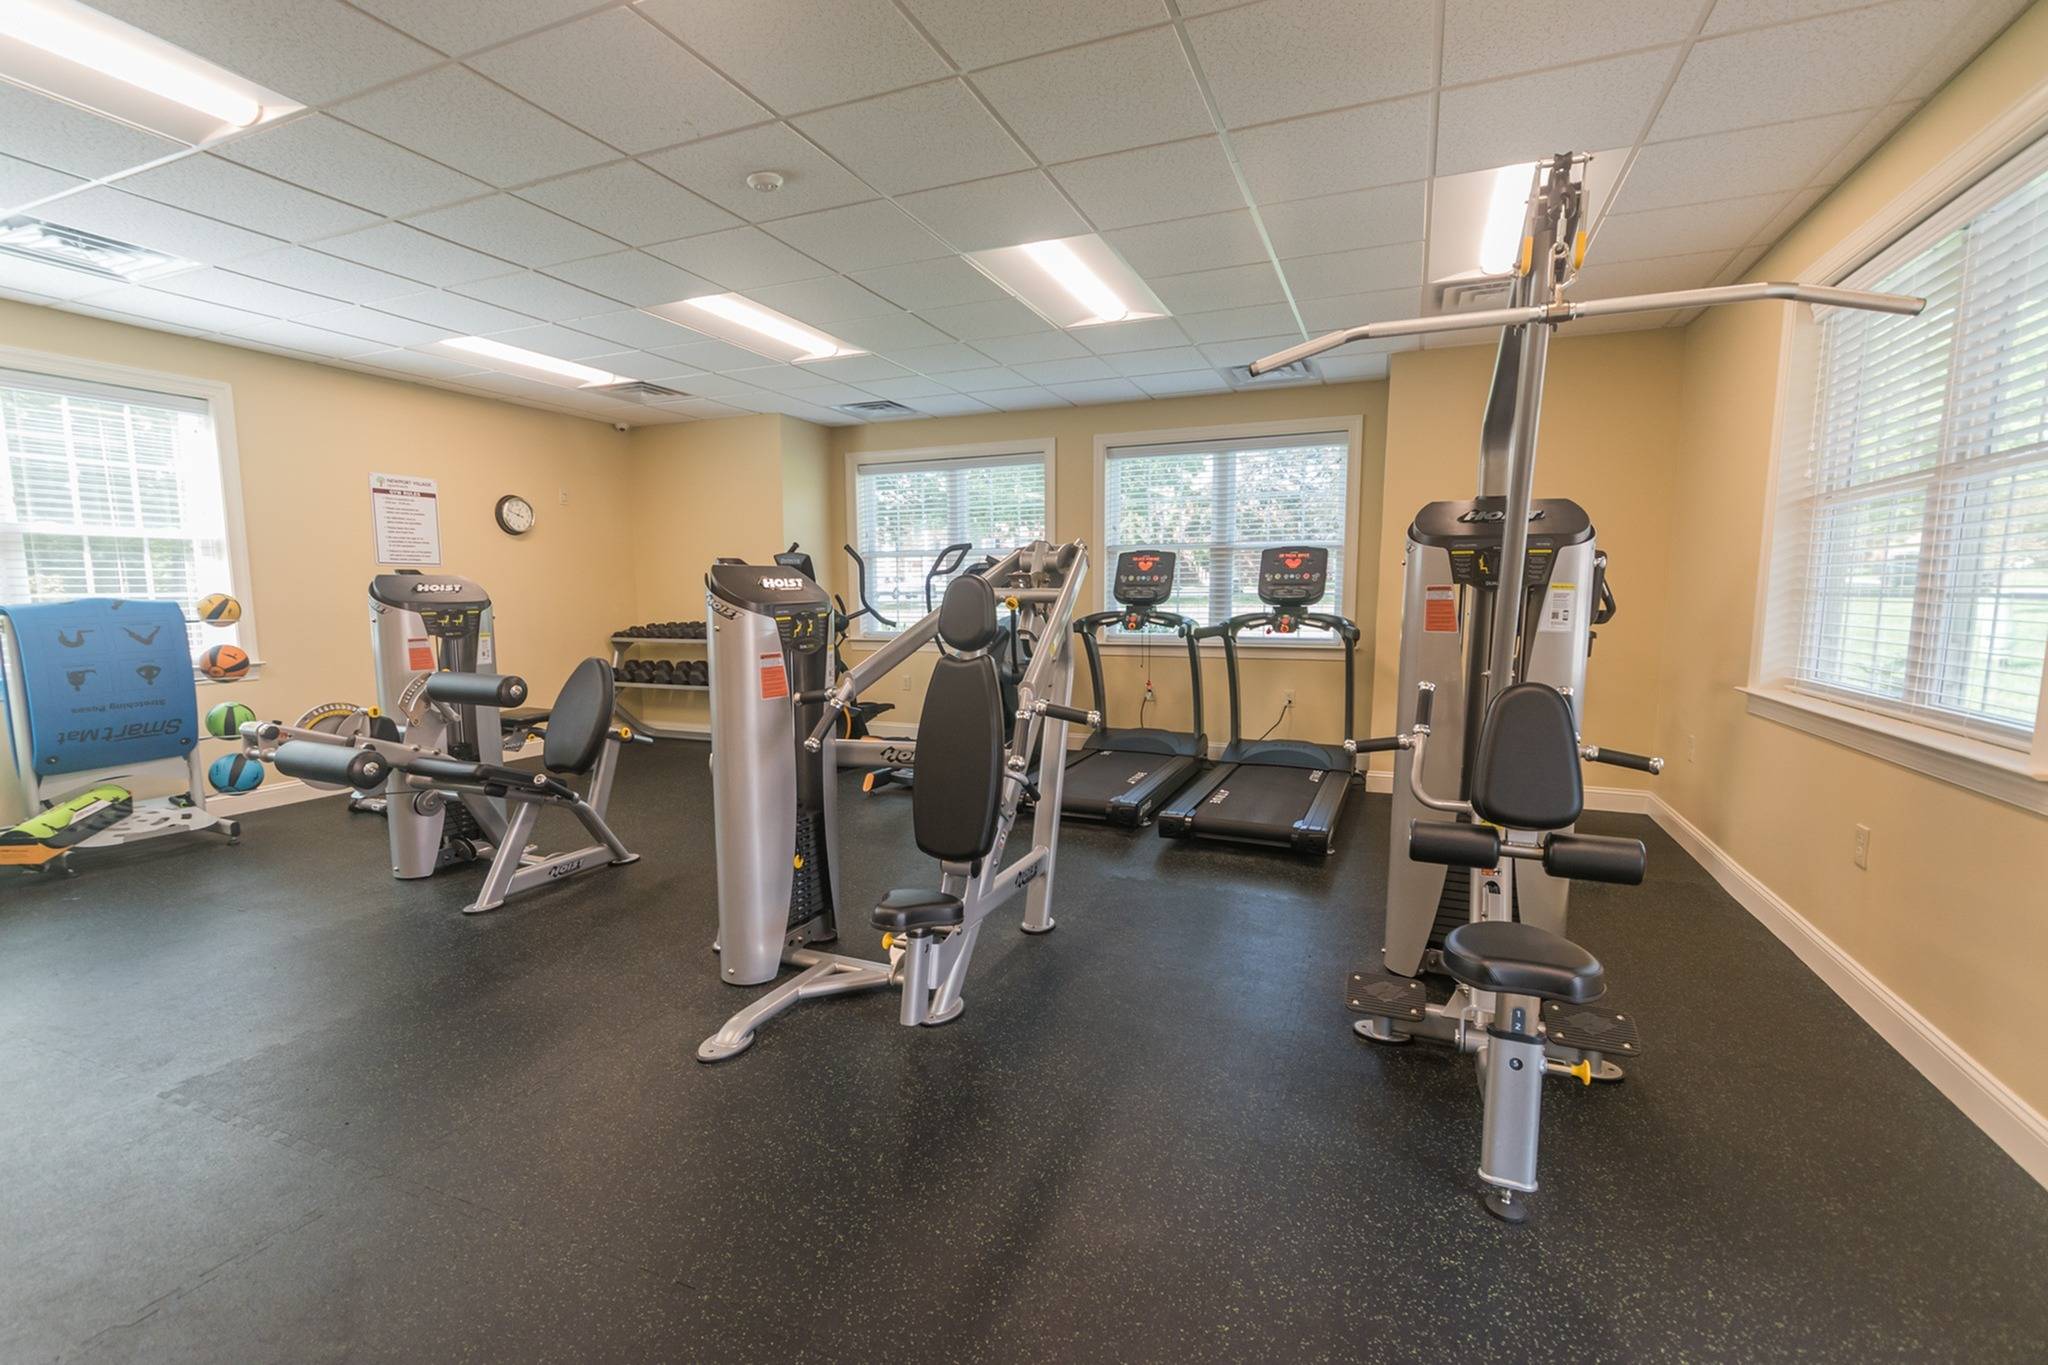 A variety of workout equipment with 4 windows at an indoor gym.